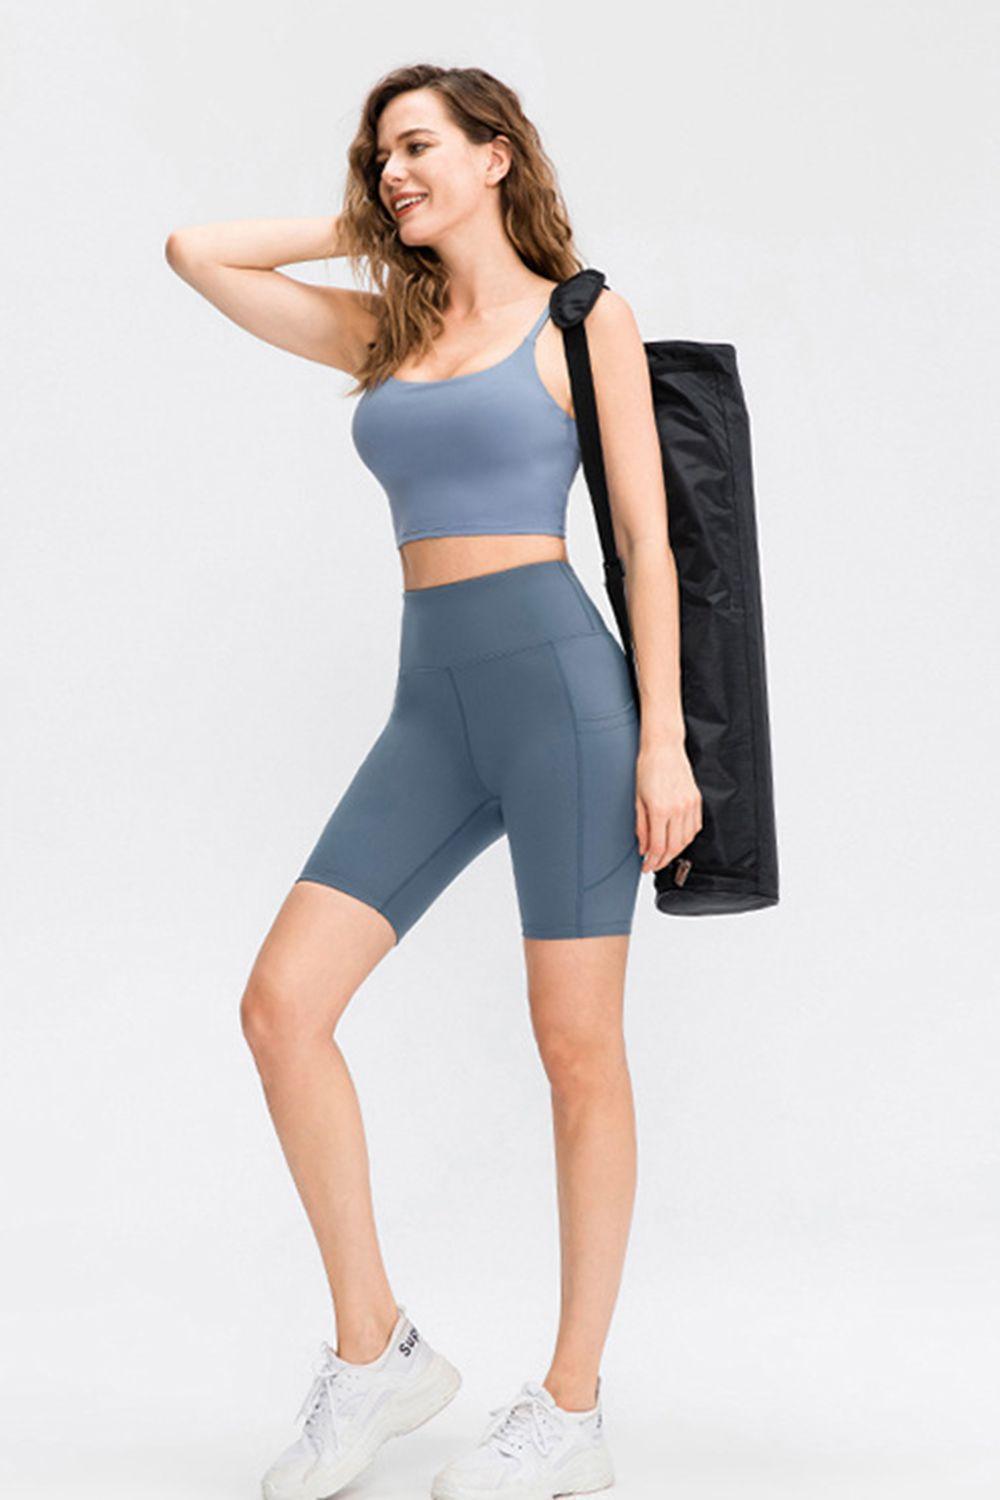 Move Easily Slim Fit Active Shorts With Pockets - MXSTUDIO.COM